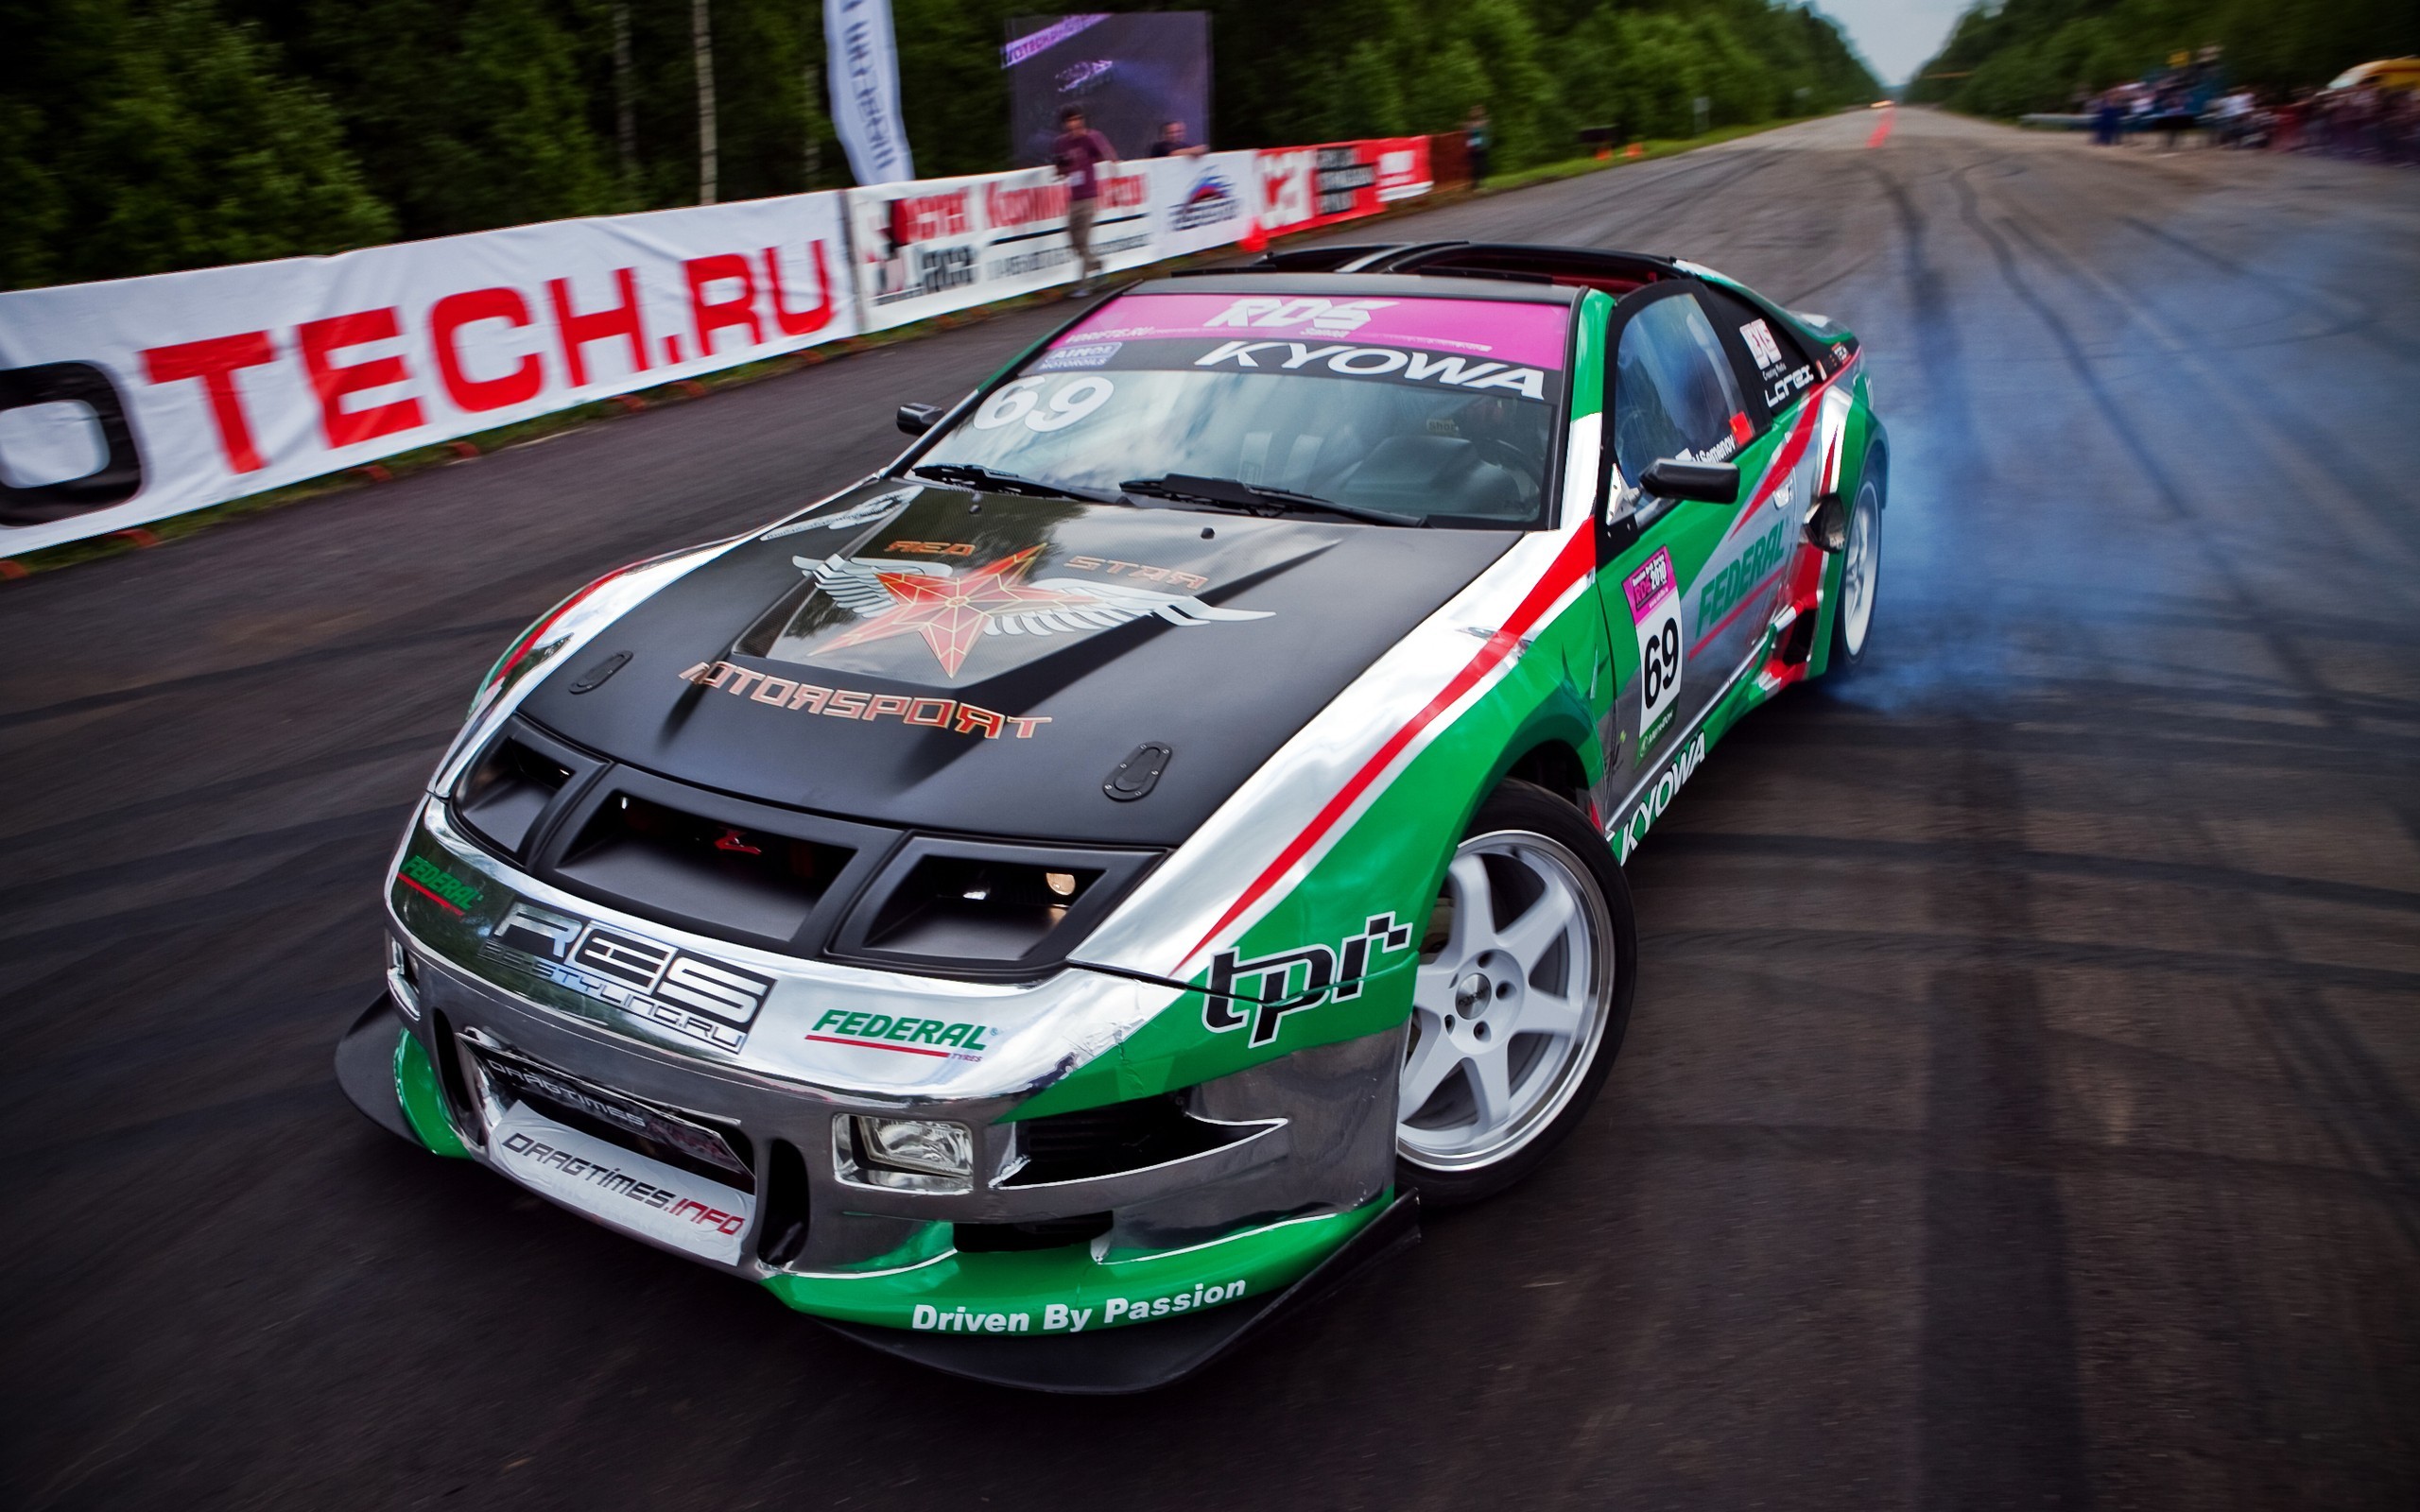 General 2560x1600 drift Nissan 300ZX Nissan Fairlady Z Nissan car race cars green cars vehicle motorsport Japanese cars frontal view smoke blurred blurry background